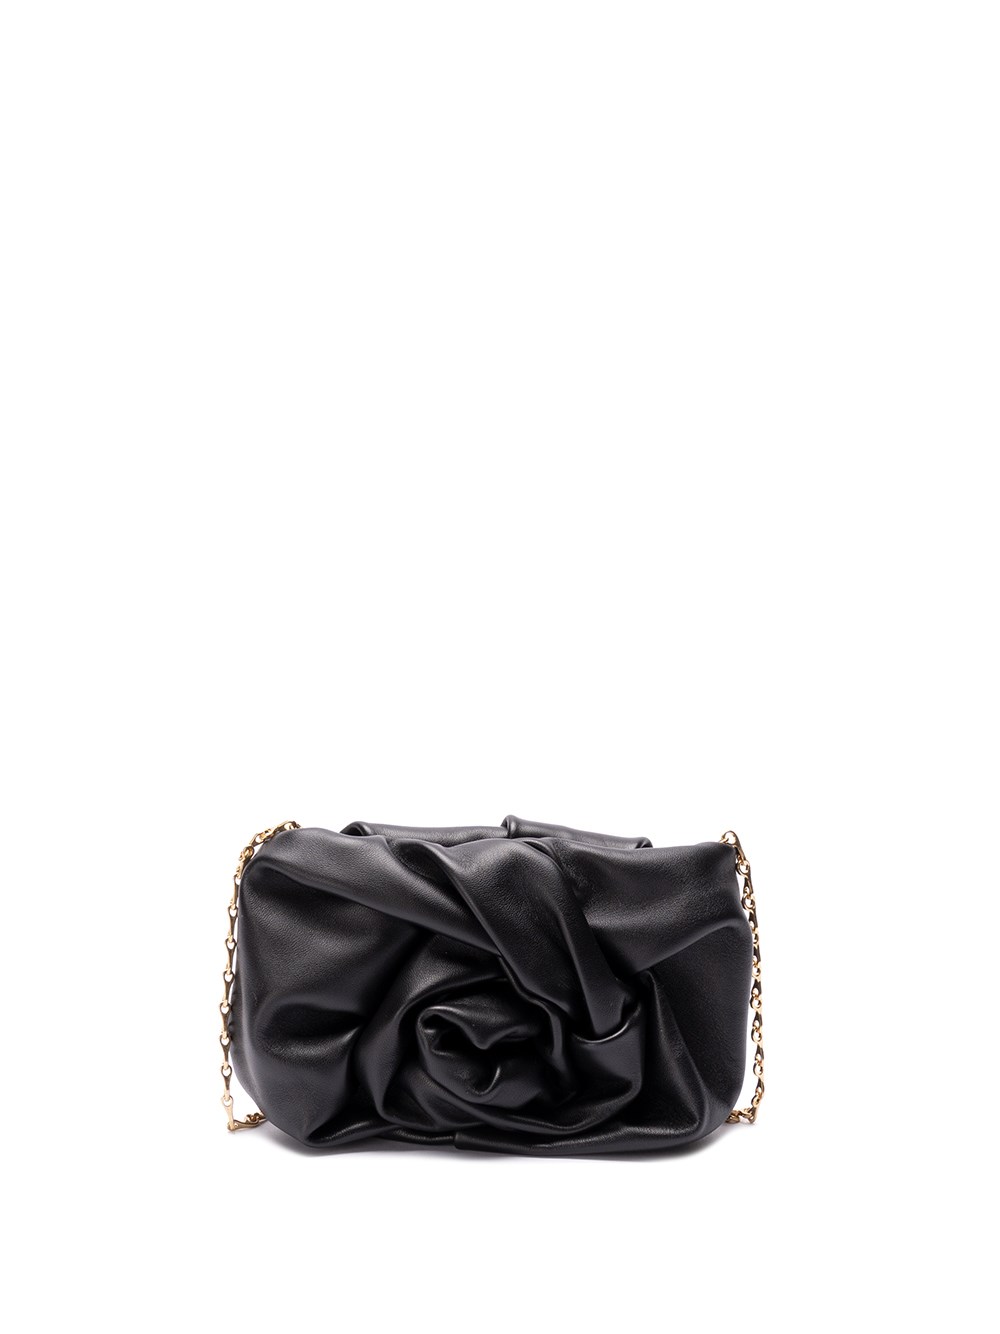 Burberry `rose` Clutch Bag With Chain In Black  